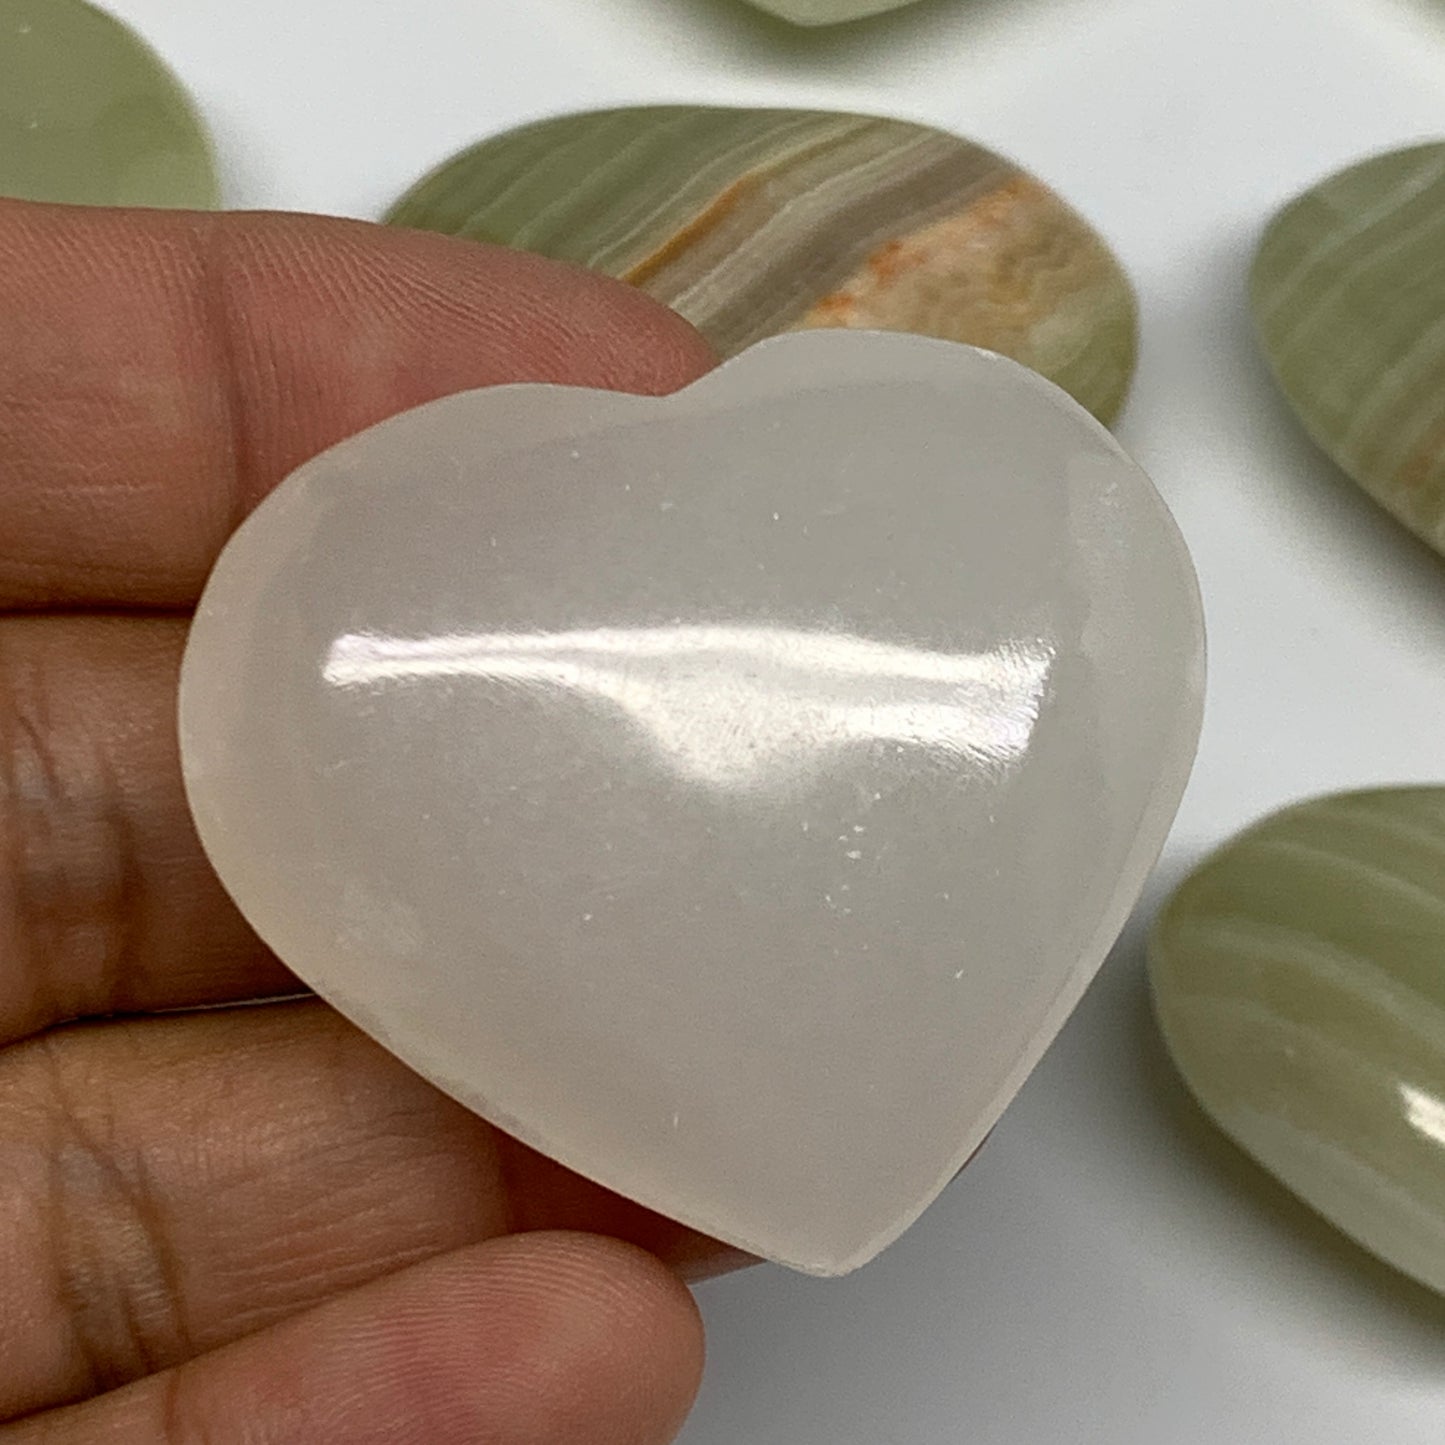 463g (1.02 lbs) ,12 pcs, 1.4"- 1.7", Green Onyx Hearts from Afghanistan, B26642